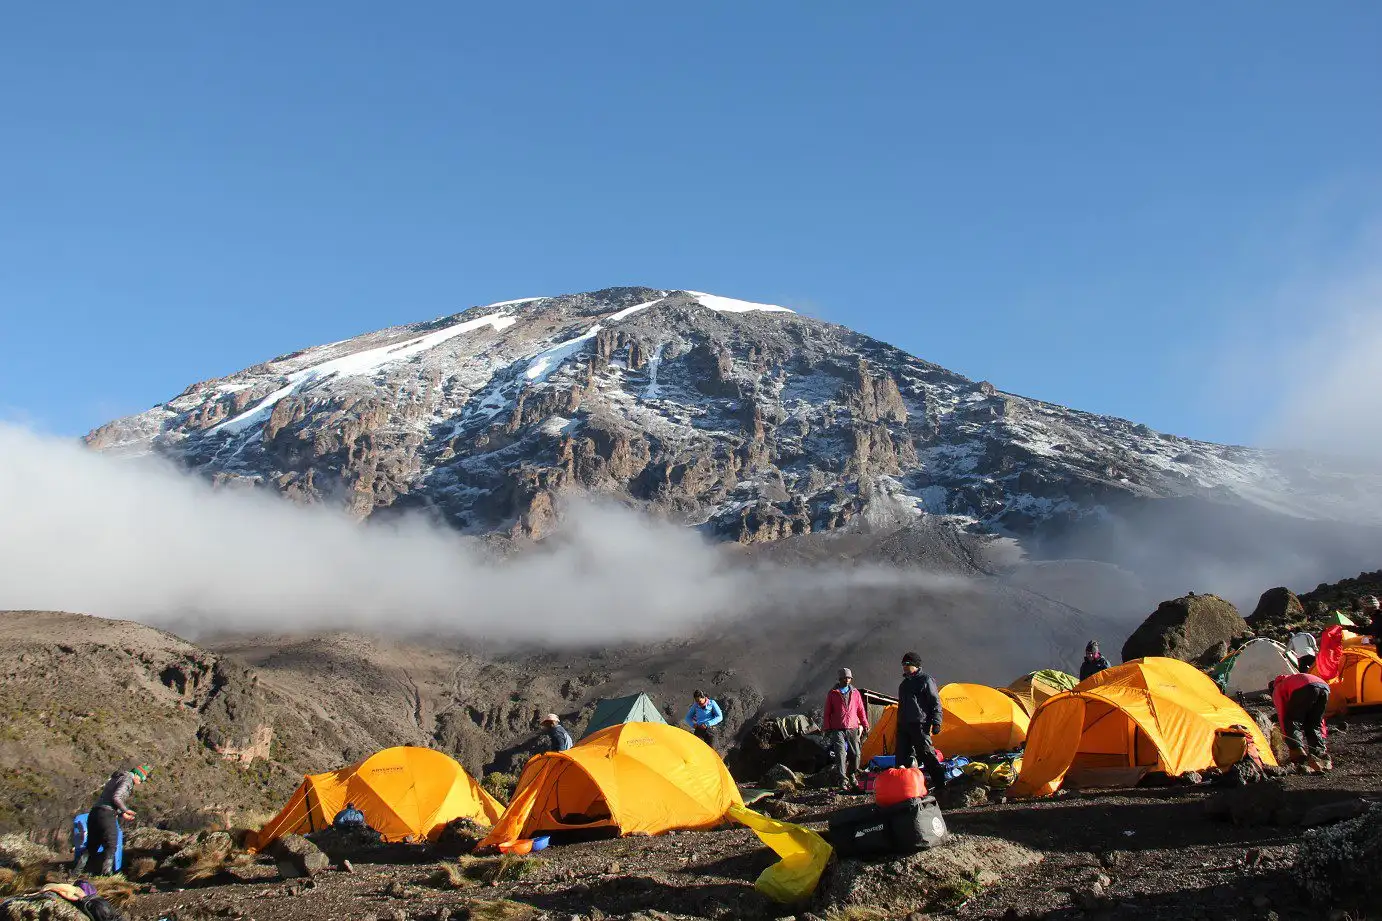 Lemosho Route 7 days Itinerary, Prices & Dates, What Is The Best Down Jacket For Climbing Kilimanjaro? 10 Reasons Why You Can't Climb Mt Kilimanjaro in a Day, Kilimanjaro Experience | Highest Mountain in Africa, Oldest Person To Climb Kilimanjaro, Best Tour Operators in Tanzania, 6 Days Shira route, How high is Mount Kilimanjaro? Everything you need to know, The 10 Biggest Misconceptions About Climbing Kilimanjaro, Do I Need a Camp Pillow for Climbing Kilimanjaro, Kilimanjaro Climb and Safari Packages, How To Prepare For Climbing Mount Kilimanjaro, Food on Kilimanjaro, Which is Harder Inca Trail or Kilimanjaro? Kilimanjaro Inspiring Stories, Natural Foods and Supplements, Kilimanjaro Books That Transport You To The Roof Of Africa, Climbing Kilimanjaro in September, Why do prices differ between Kilimanjaro tour operators?, It is Important to Find Good Footwear for Kilimanjaro, What Plants and Trees Will I See on Mount Kilimanjaro?, How To Stay Warm On The Summit Of Kilimanjaro?, What is the Best Sleeping Bag for Climbing Kilimanjaro?, Kilimanjaro Base Camp and Campsites by Route